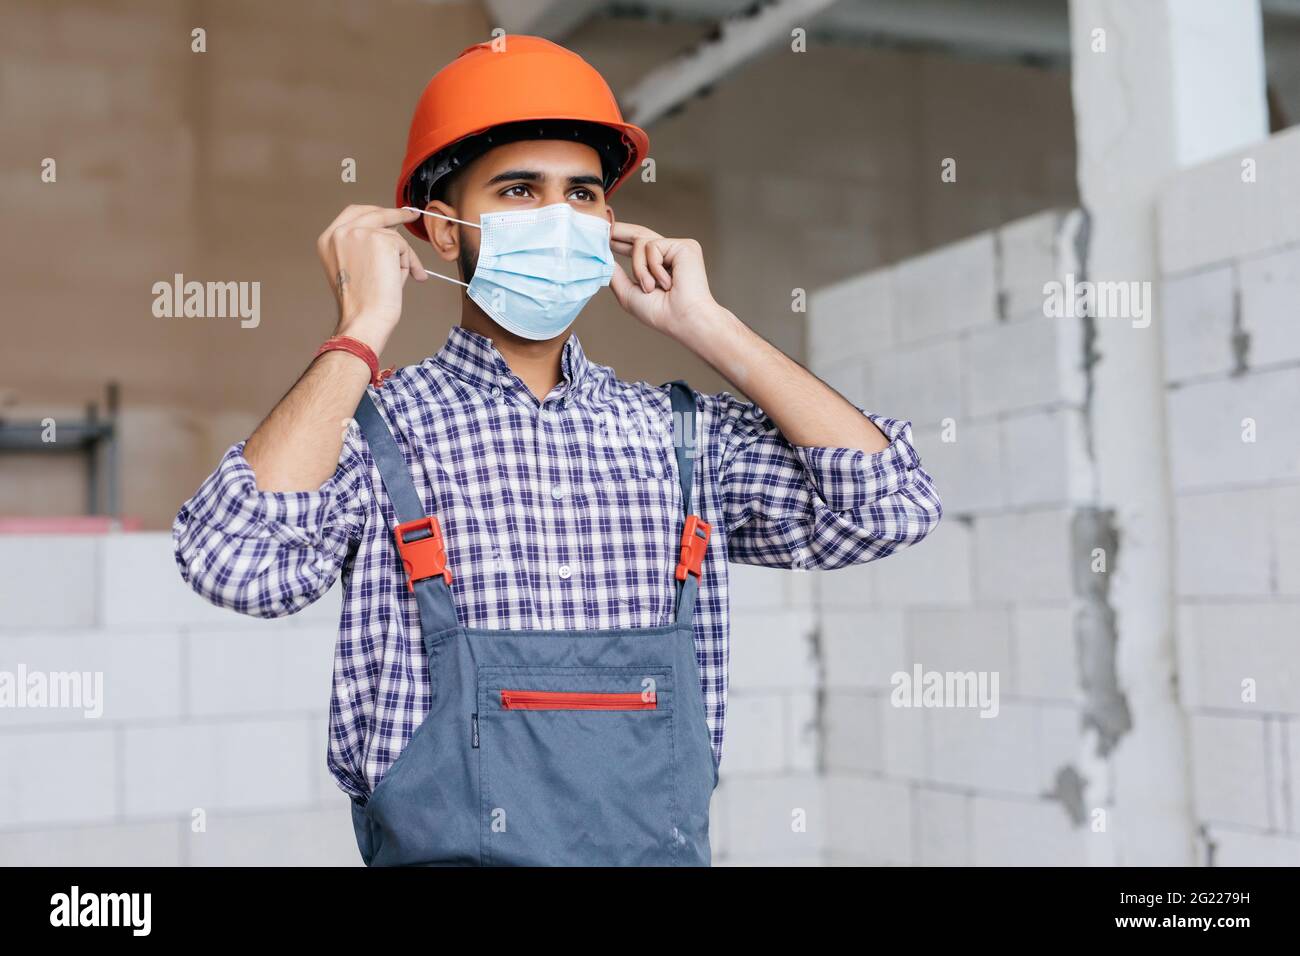 Construction worker portrait on white wall posing with face mask covid -19 prevention Stock Photo